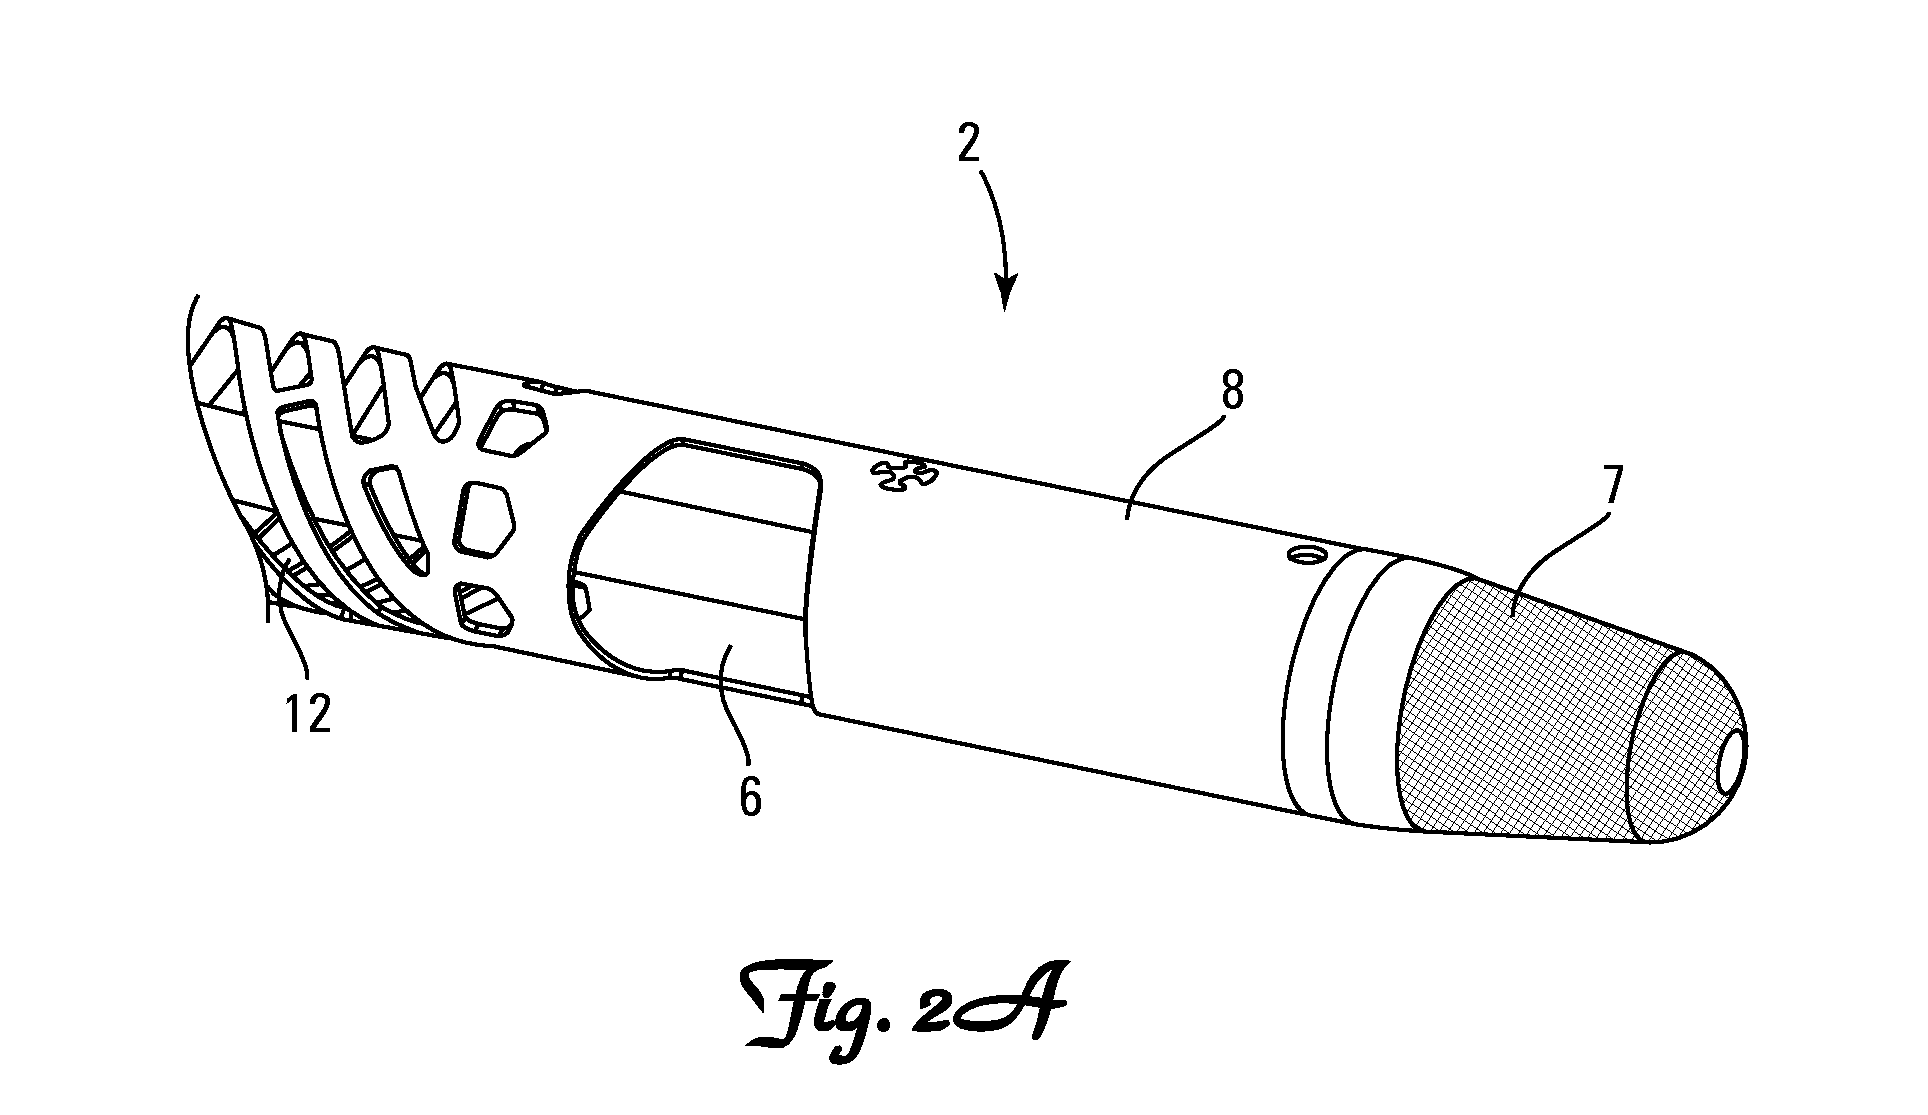 Material removal device and method of use